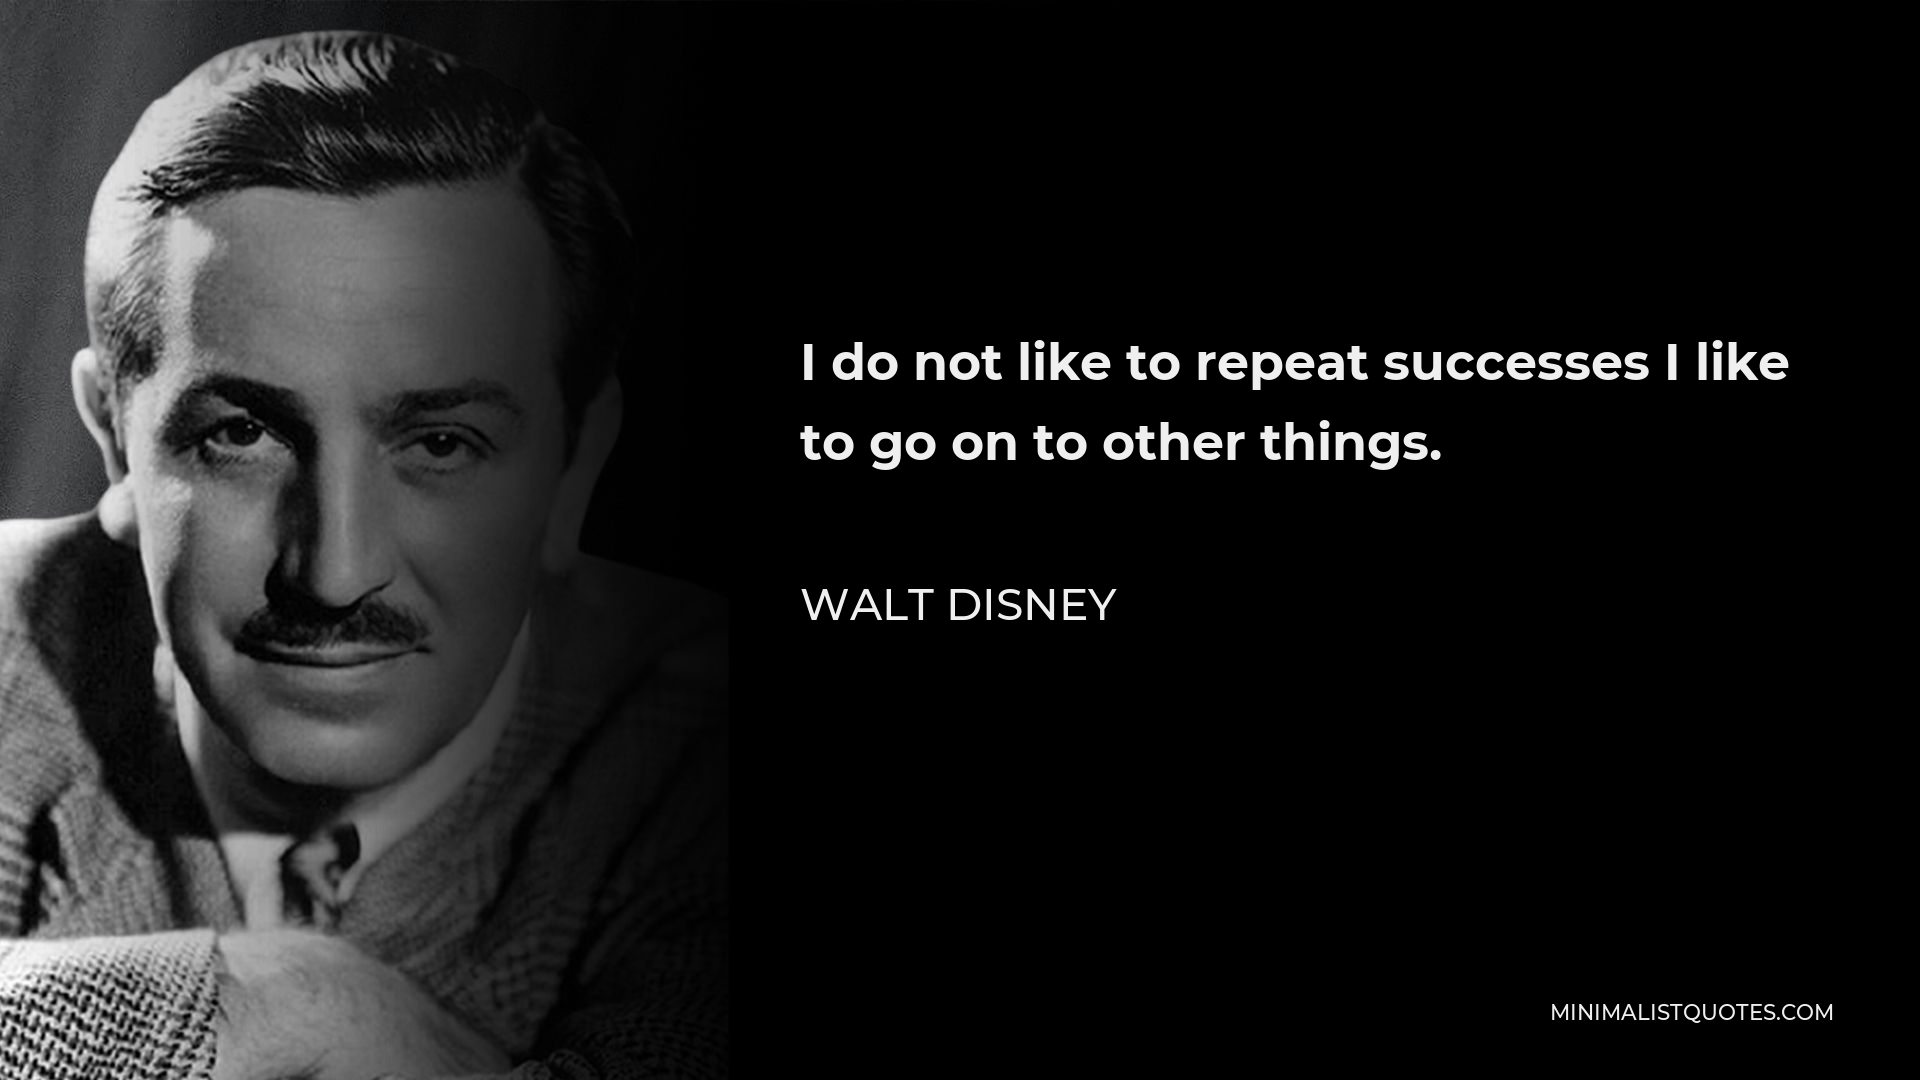 Walt Disney Quote - I do not like to repeat successes I like to go on to other things.